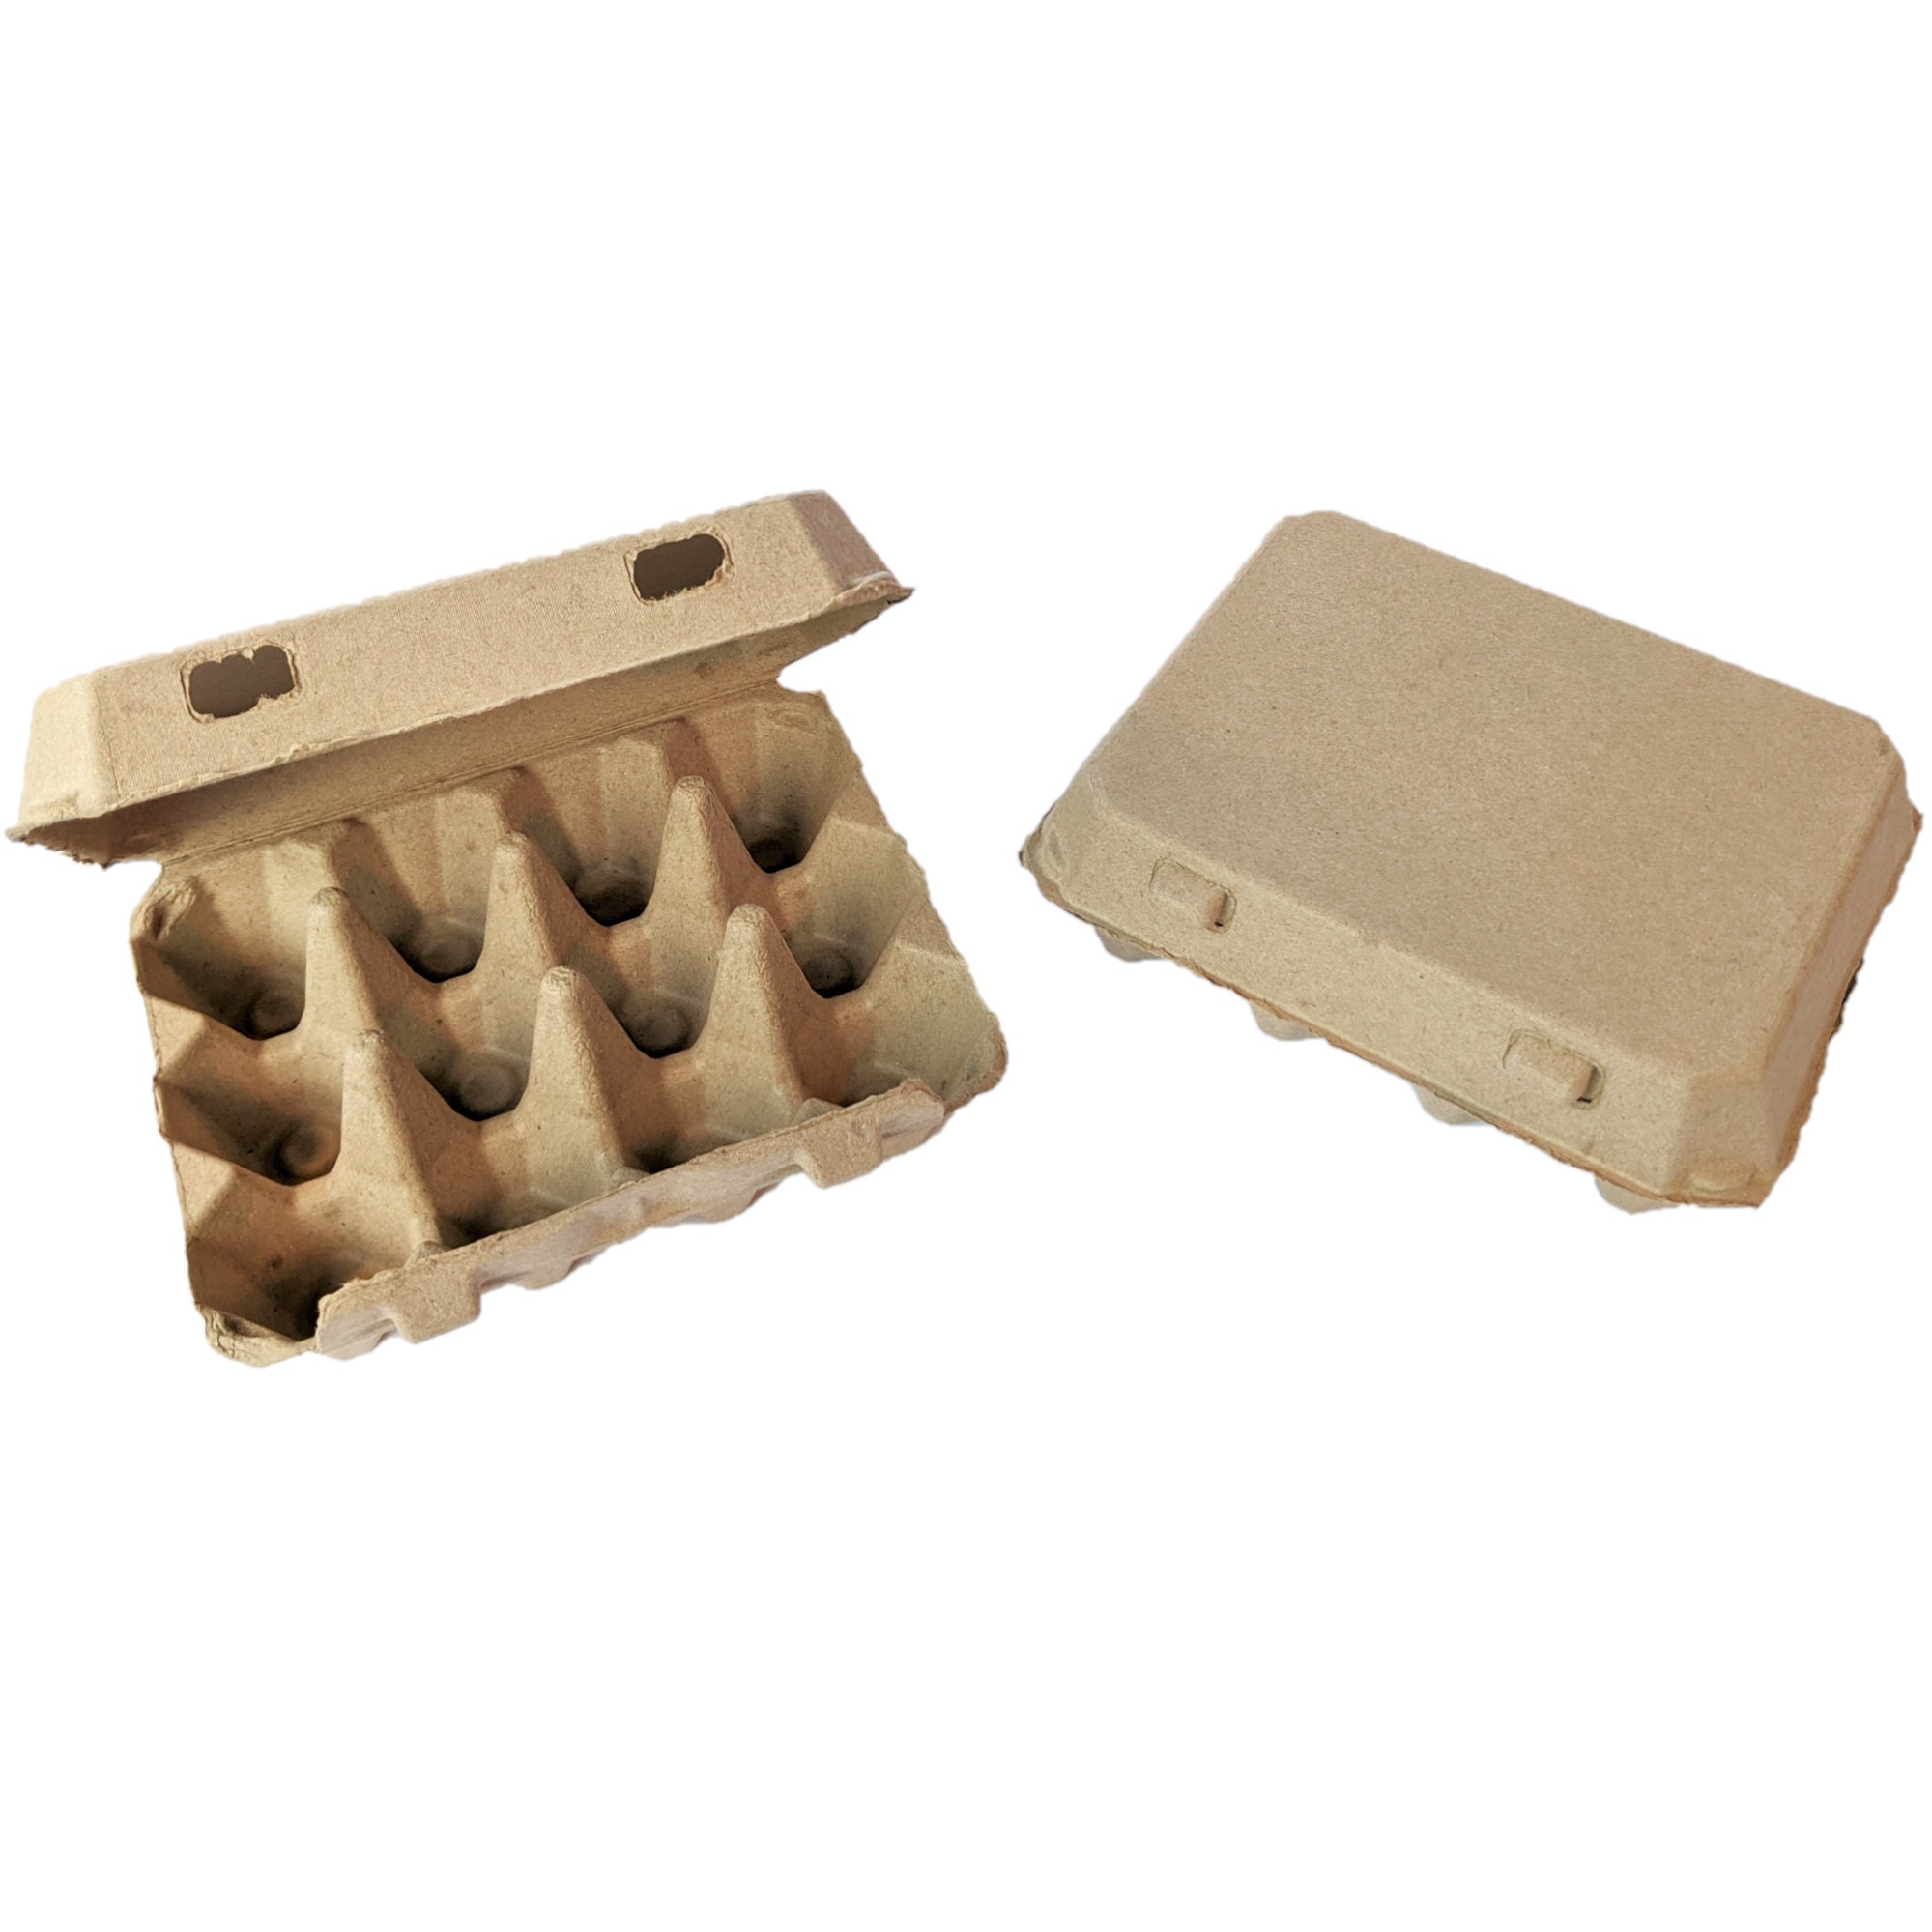 Vintage Blank Egg Cartons - 3x4 Style Made from Recycled Cardboard